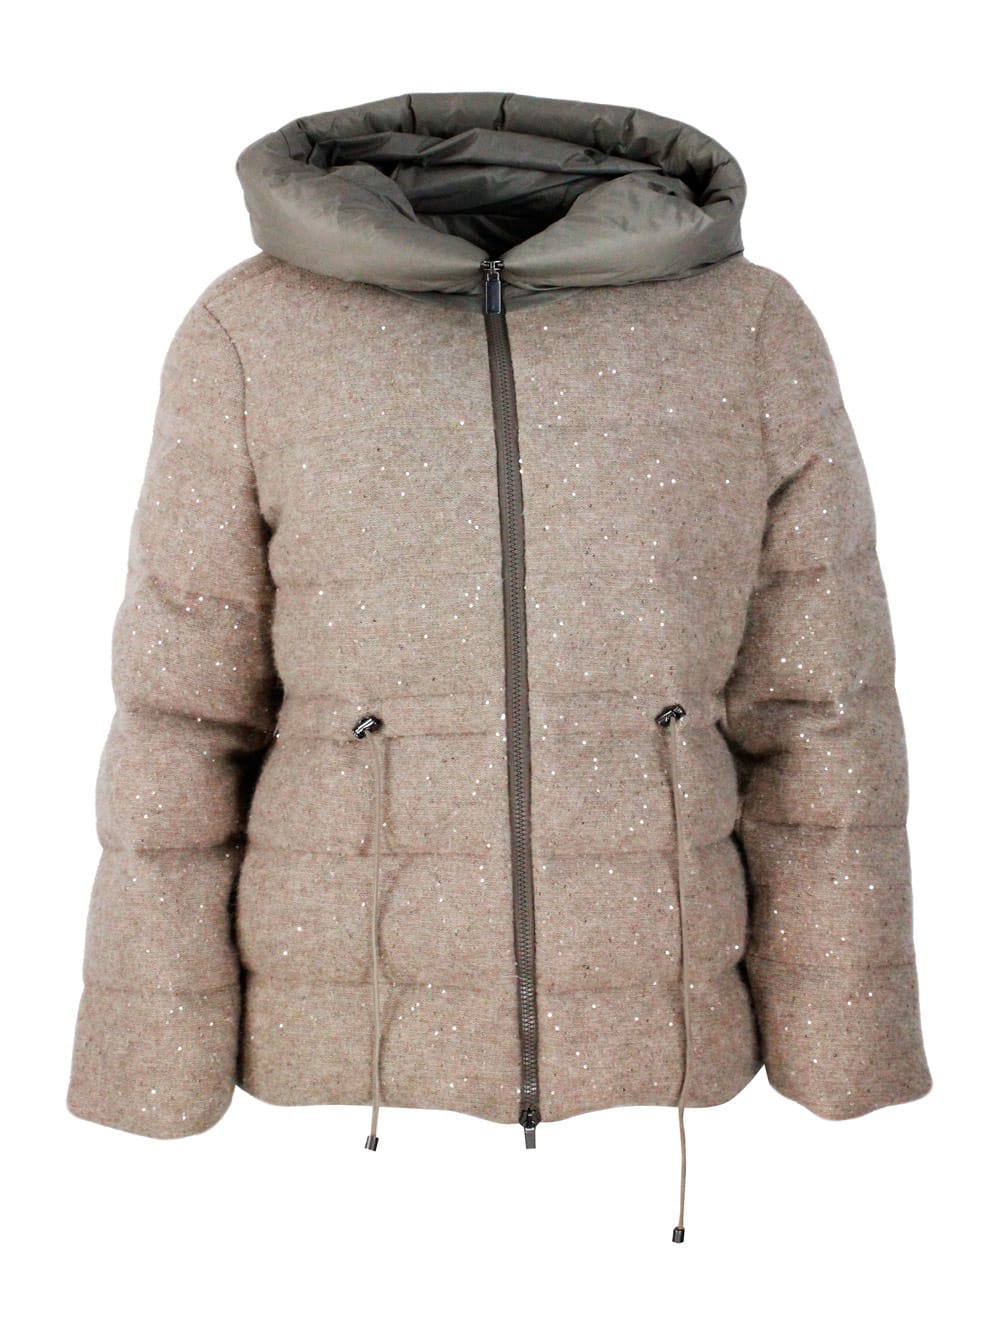 Fabiana Filippi Down Jacket Padded With Real Goose Down Made Of Soft And Precious Wool, Silk And Cashmere With Draws In Nut